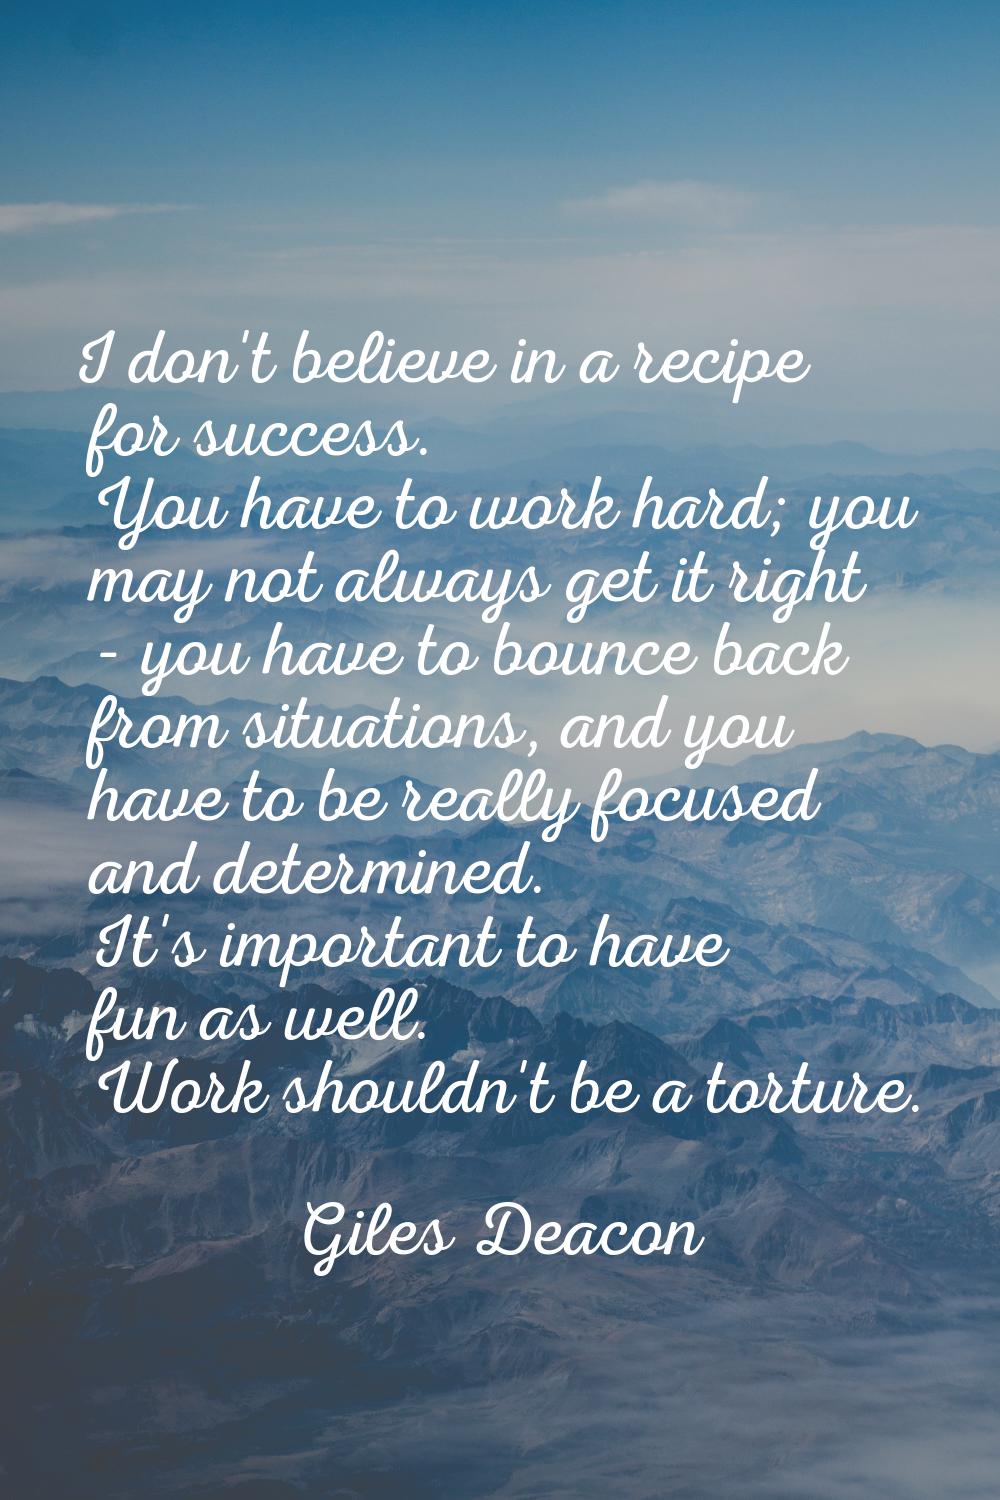 I don't believe in a recipe for success. You have to work hard; you may not always get it right - y